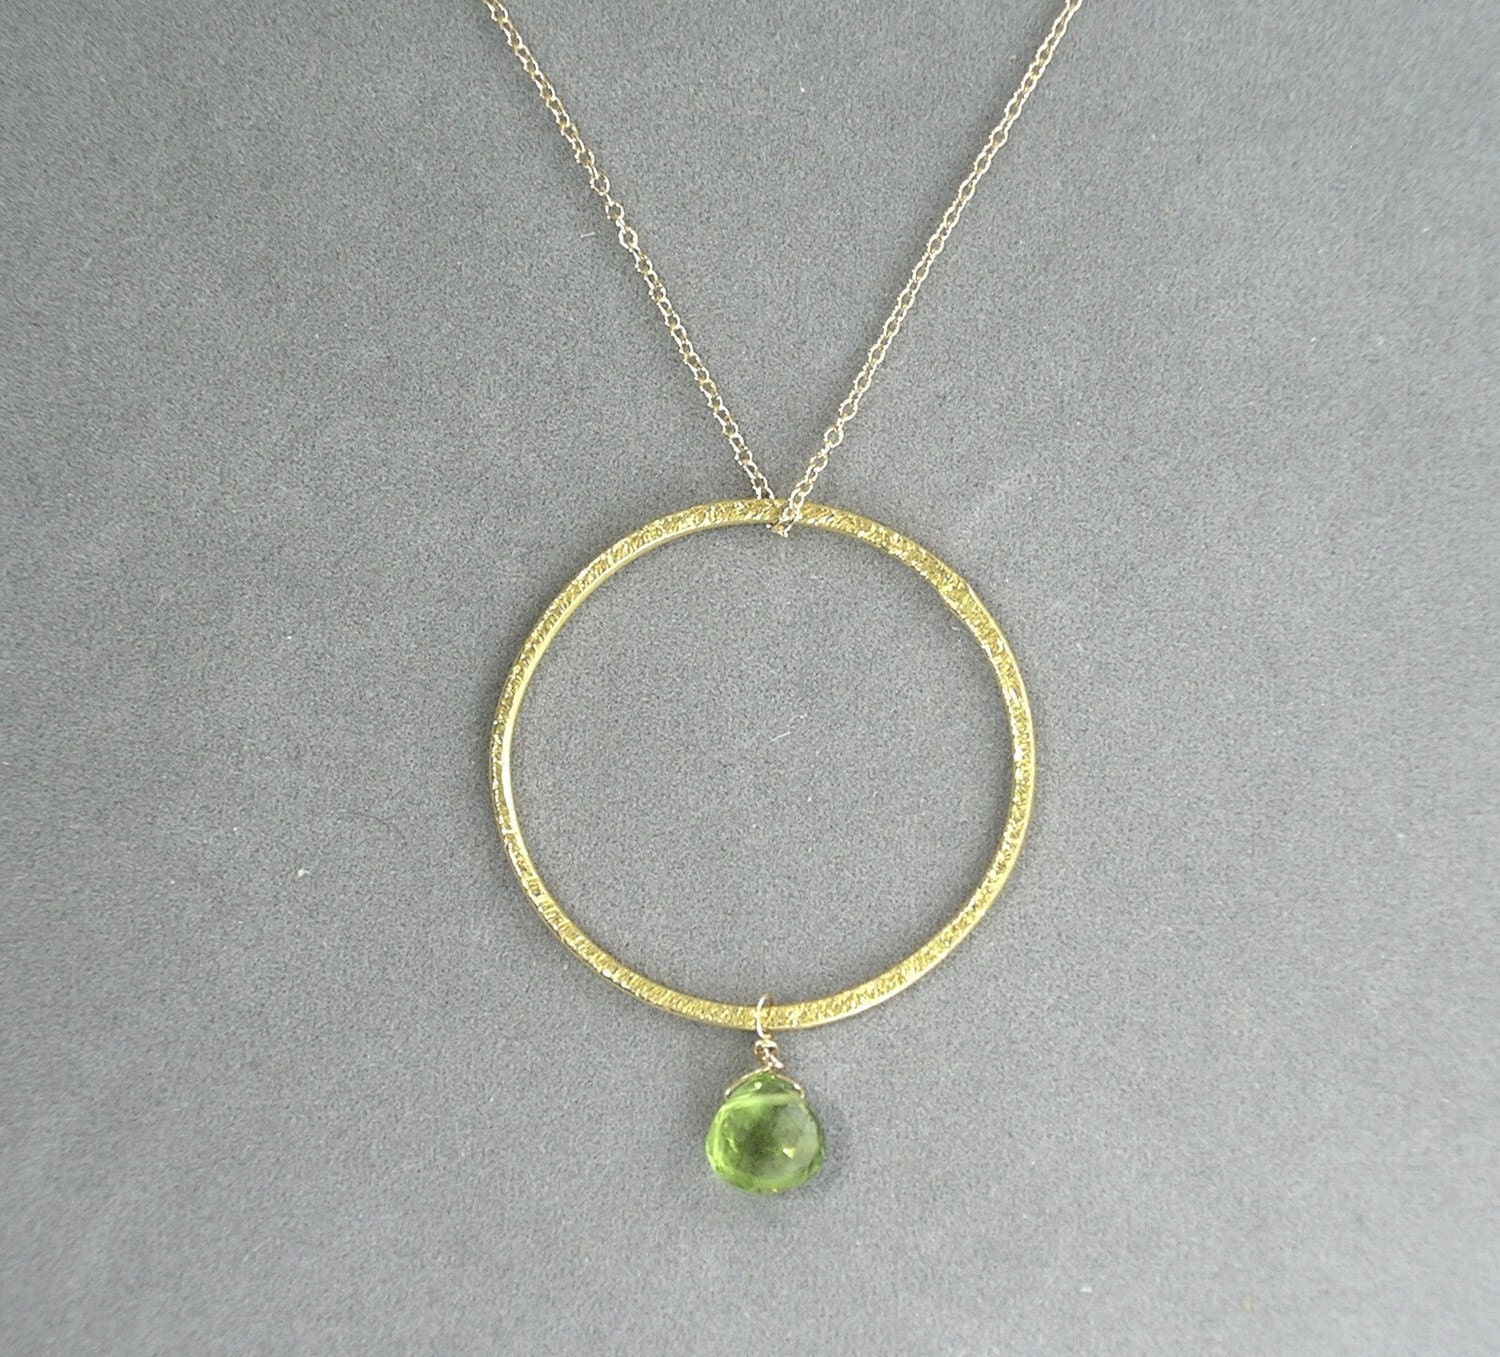 necklace with brushed gold hoop and peridot by rockedjewelry